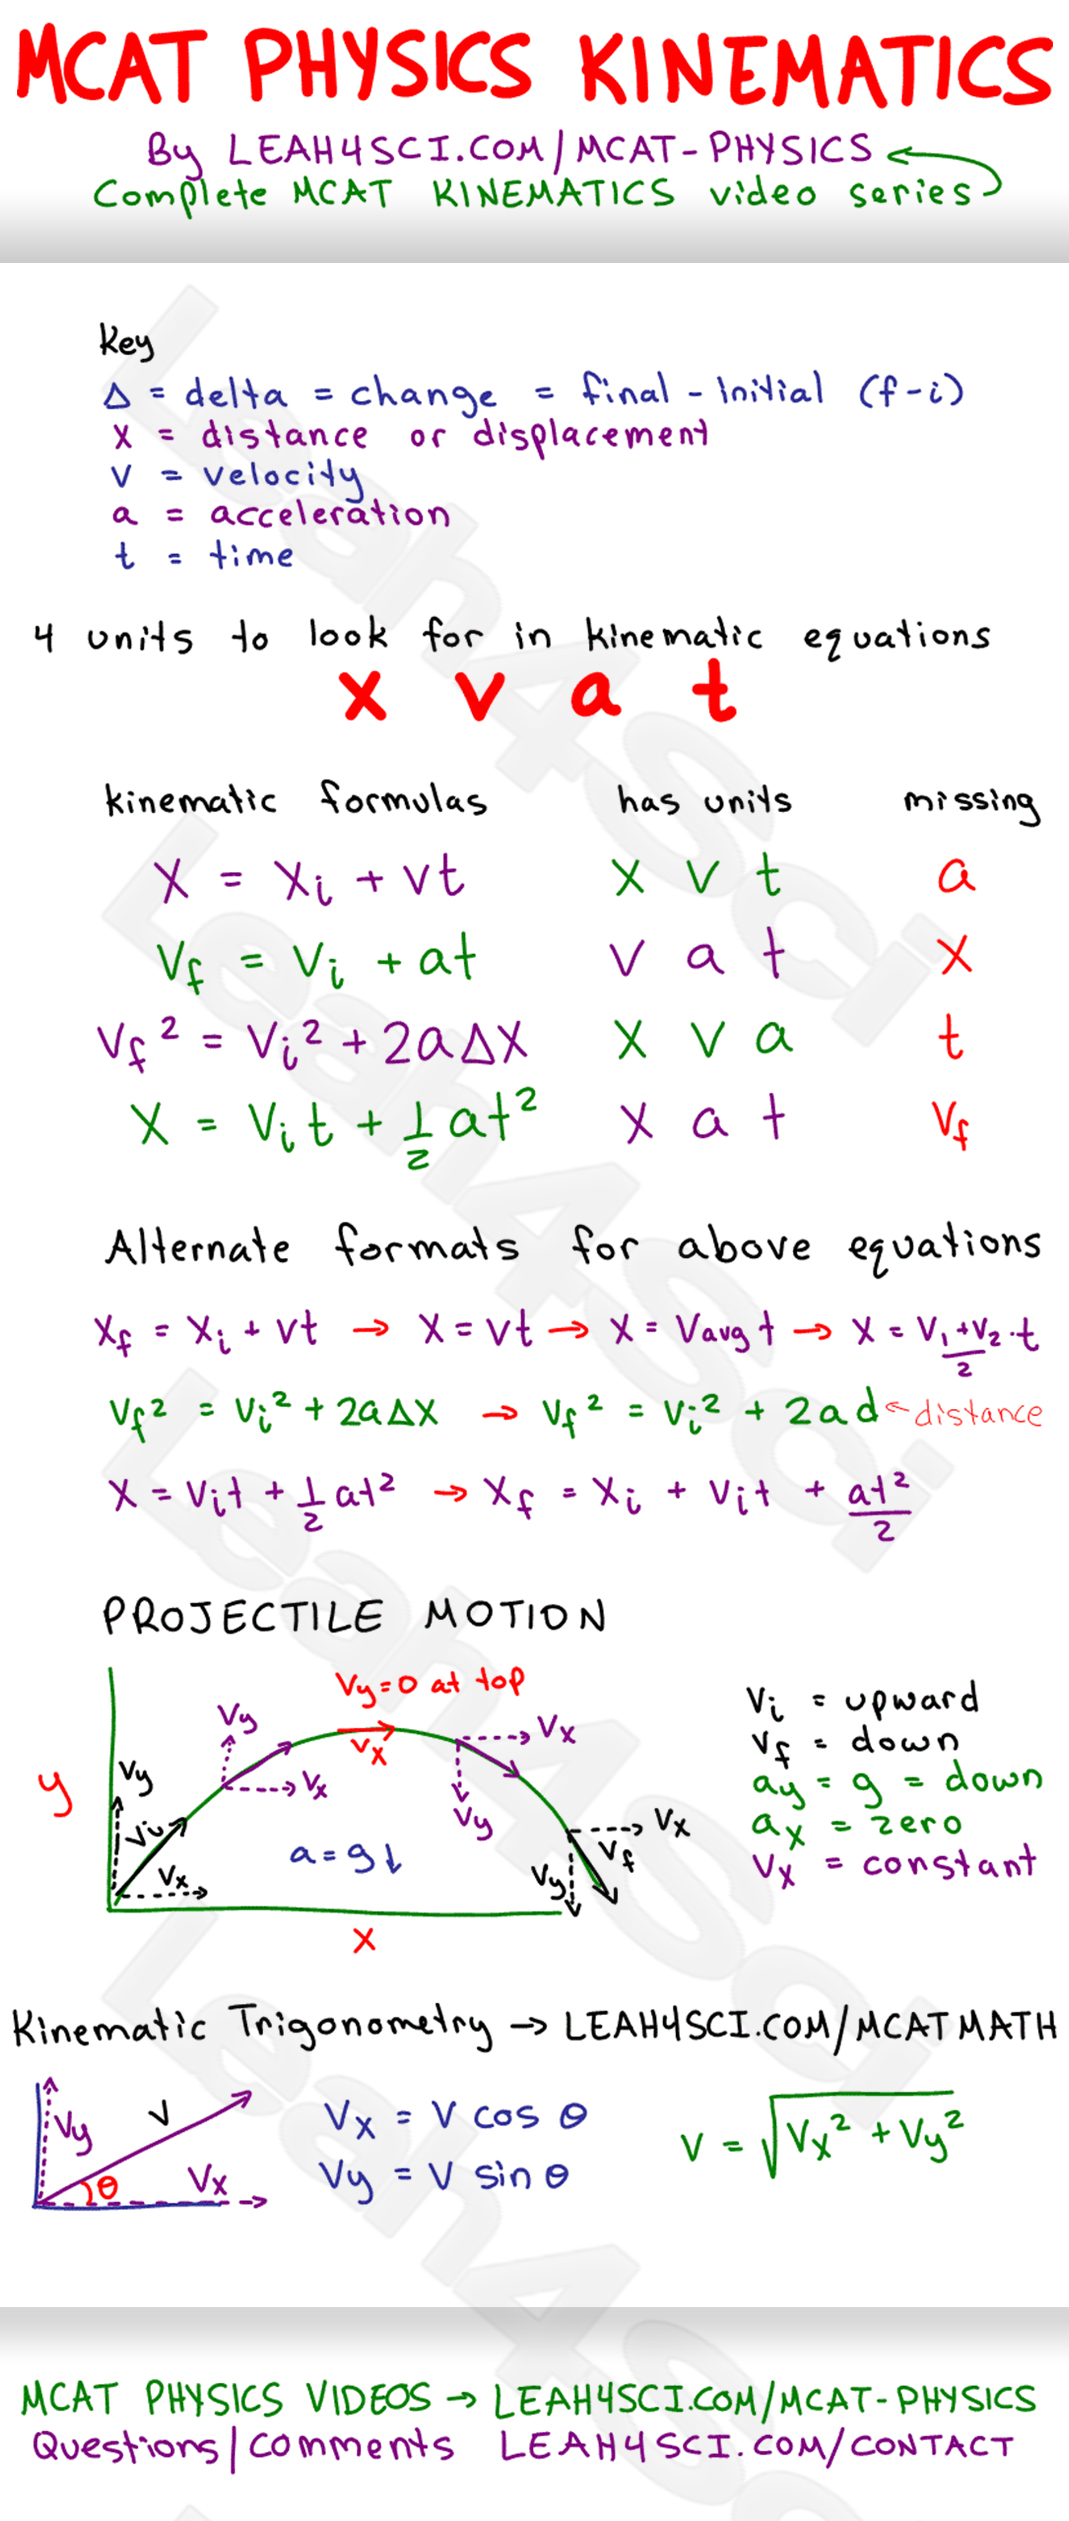 mcat-kinematic-equations-study-guide-cheat-sheet